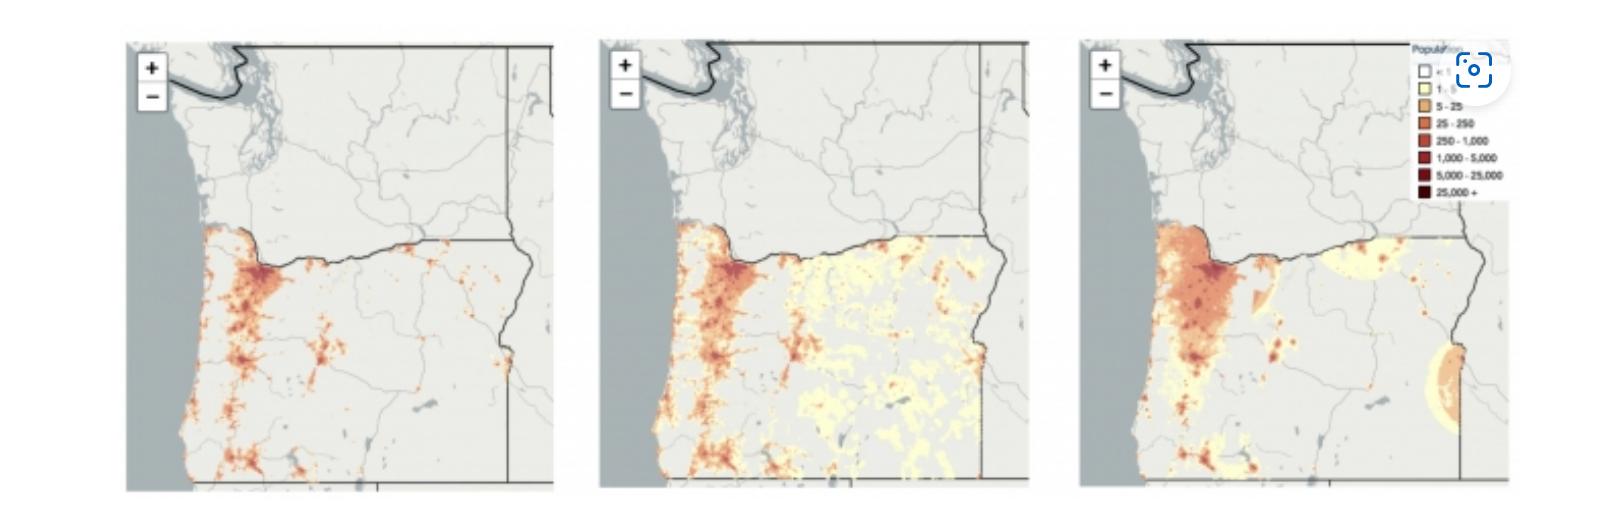 maps showing projections of the spatial distribution of population for the state of Oregon in 2050